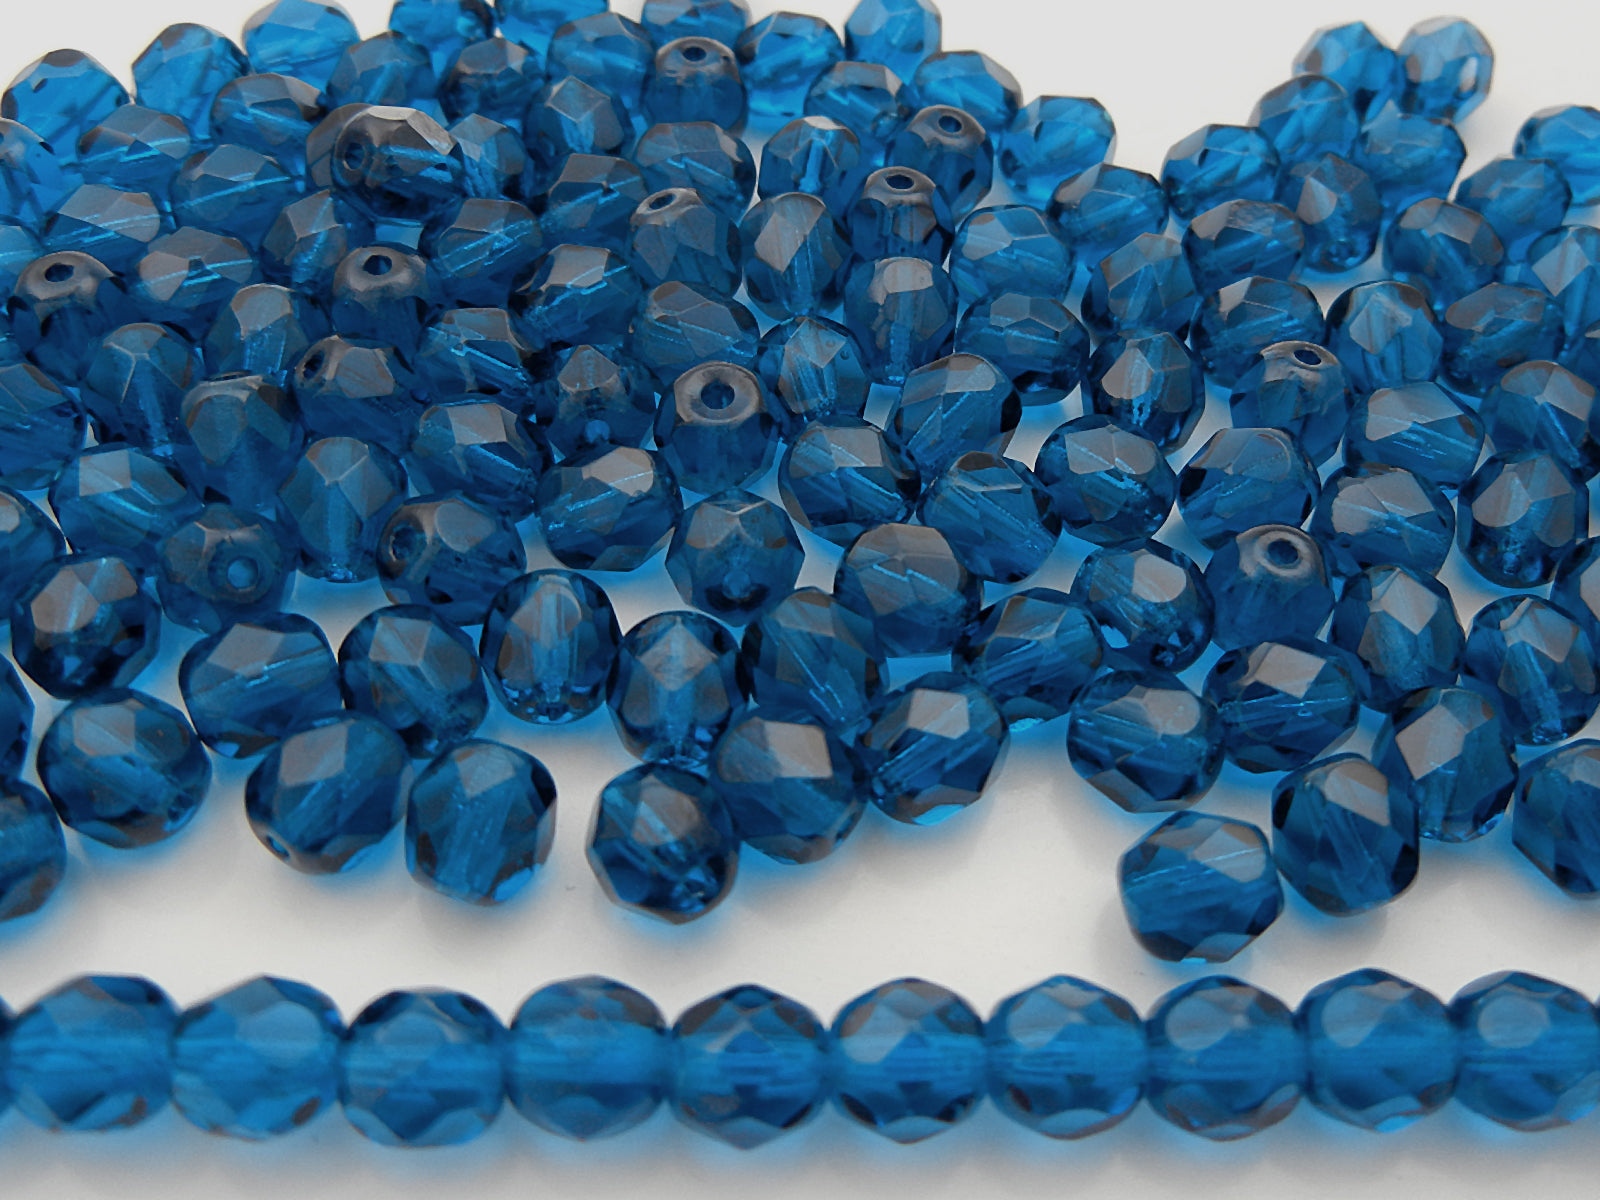 Dark Aqua, Czech Fire Polished Round Faceted Glass Beads, 16 inch strand